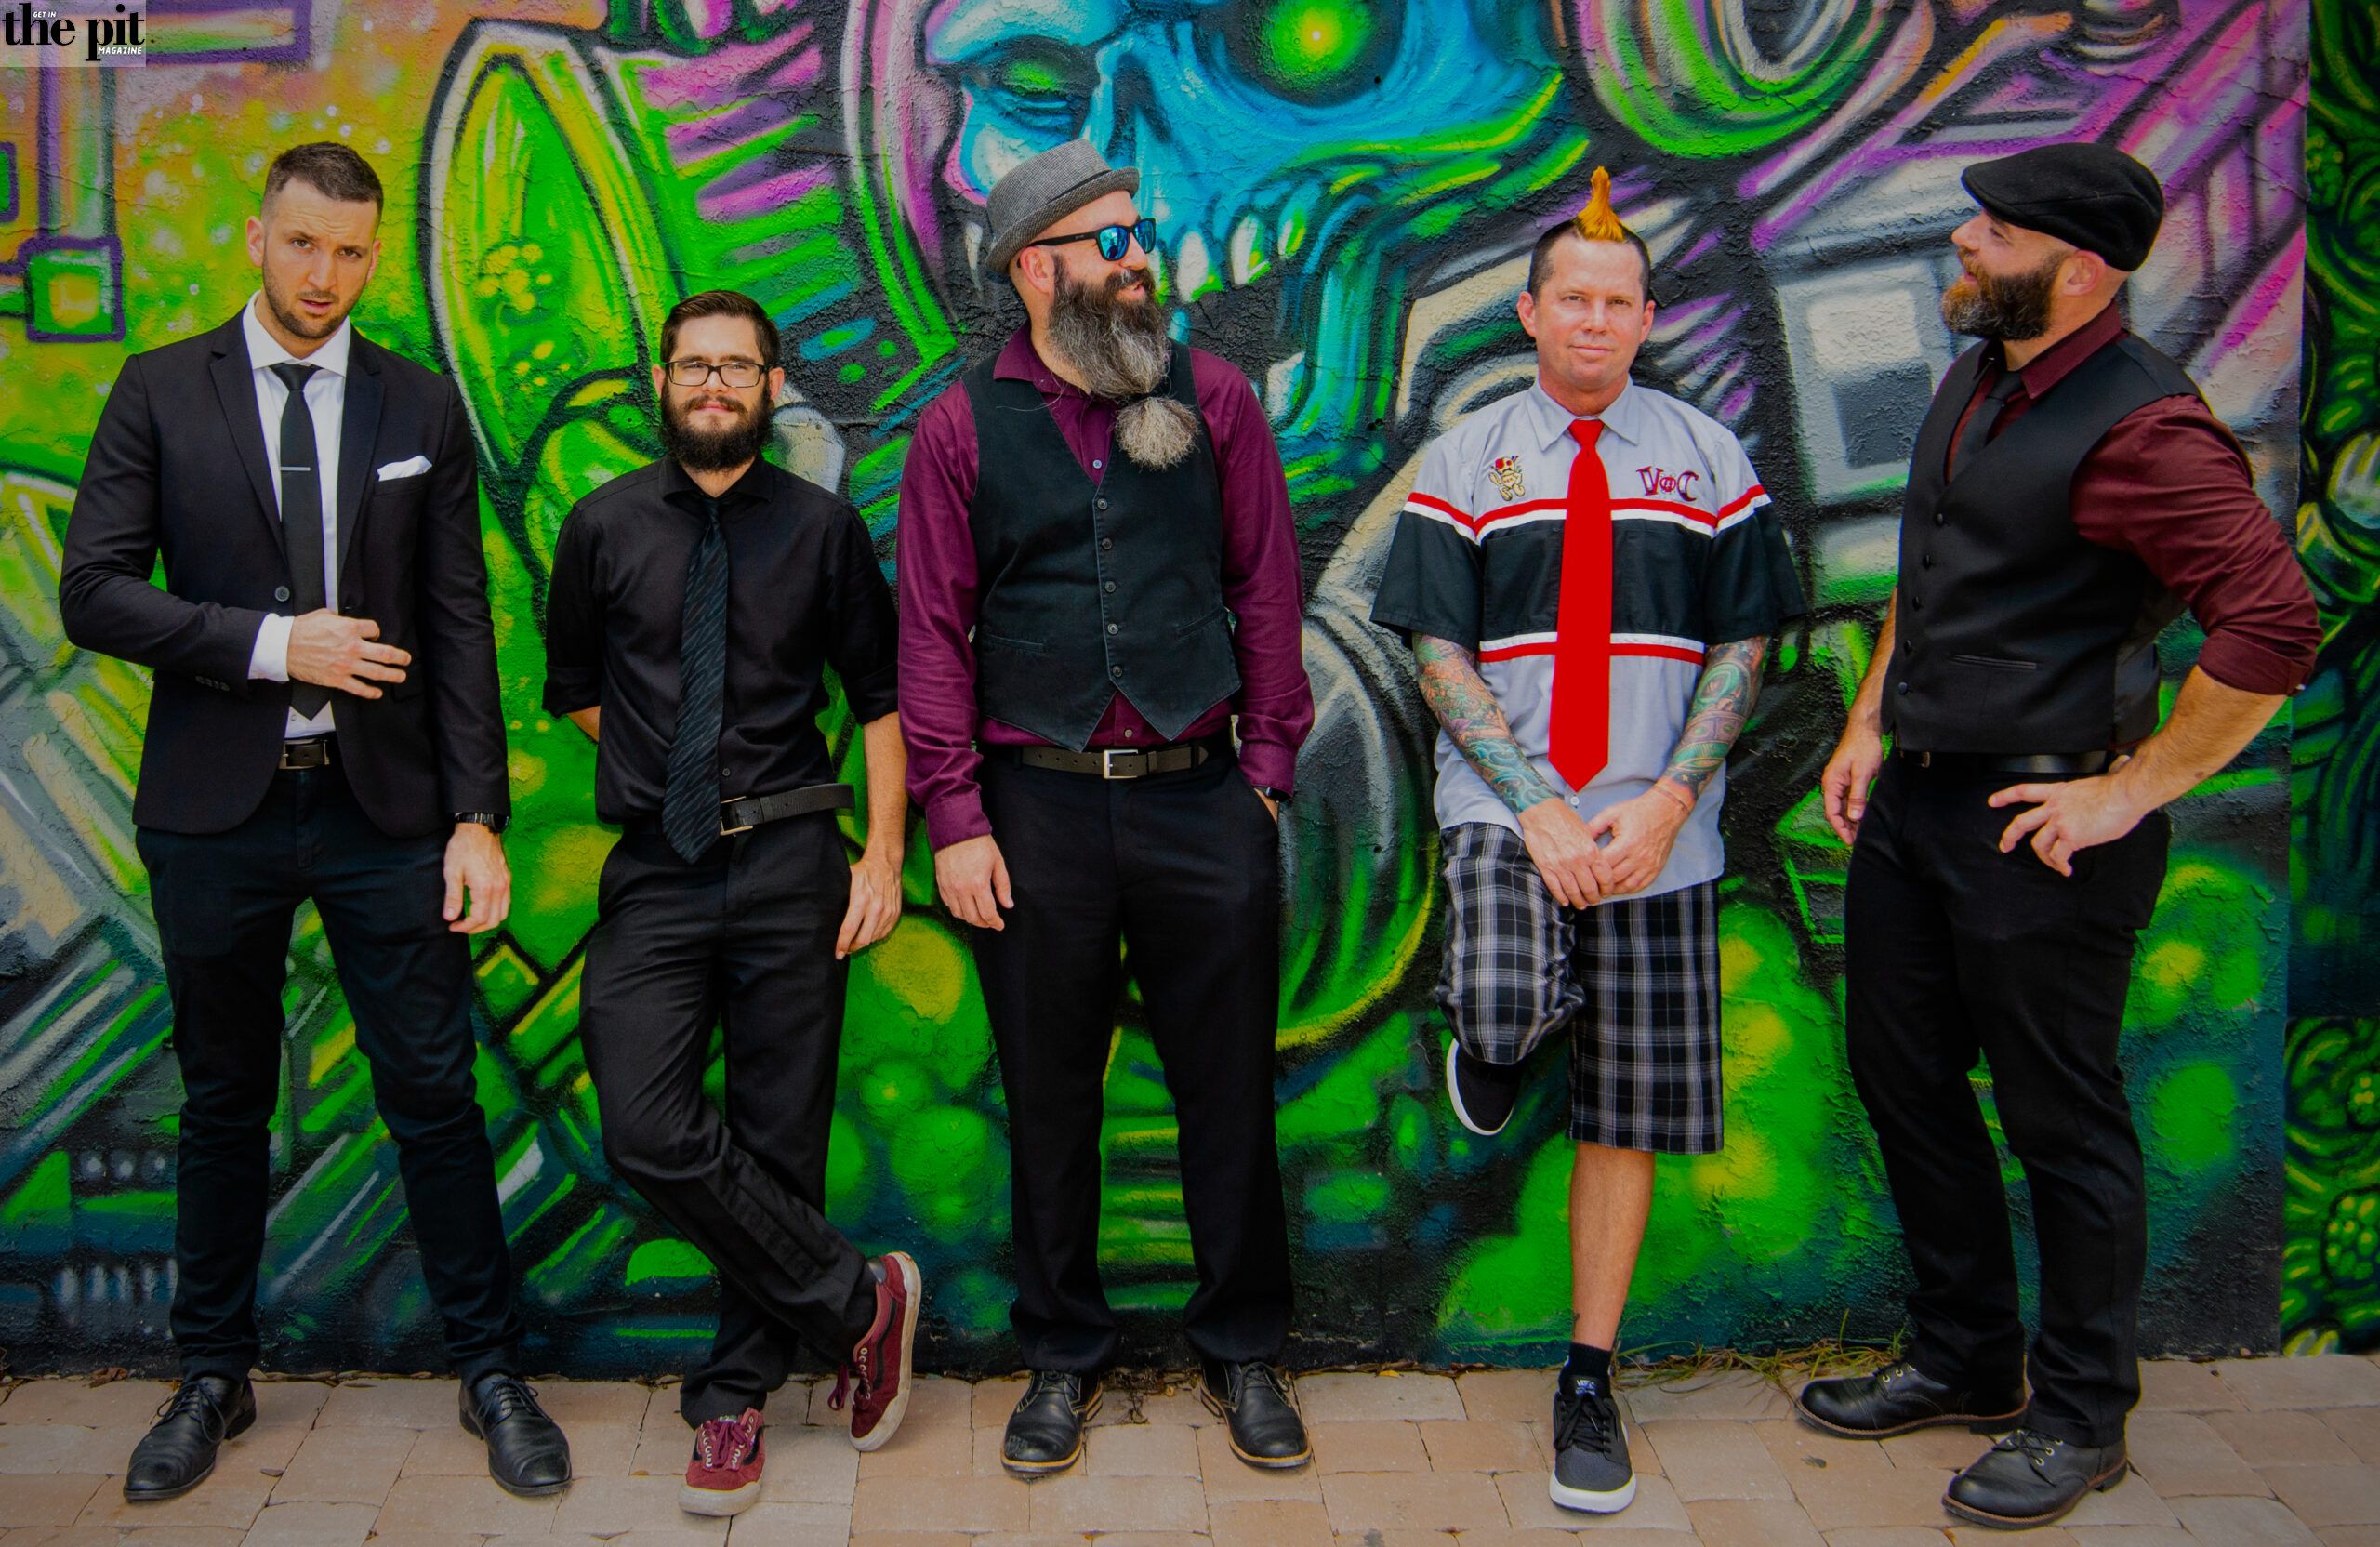 Five men in various outfits, victims of circumstance, pose in front of a colorful graffiti wall, each displaying a unique style from formal to casual.